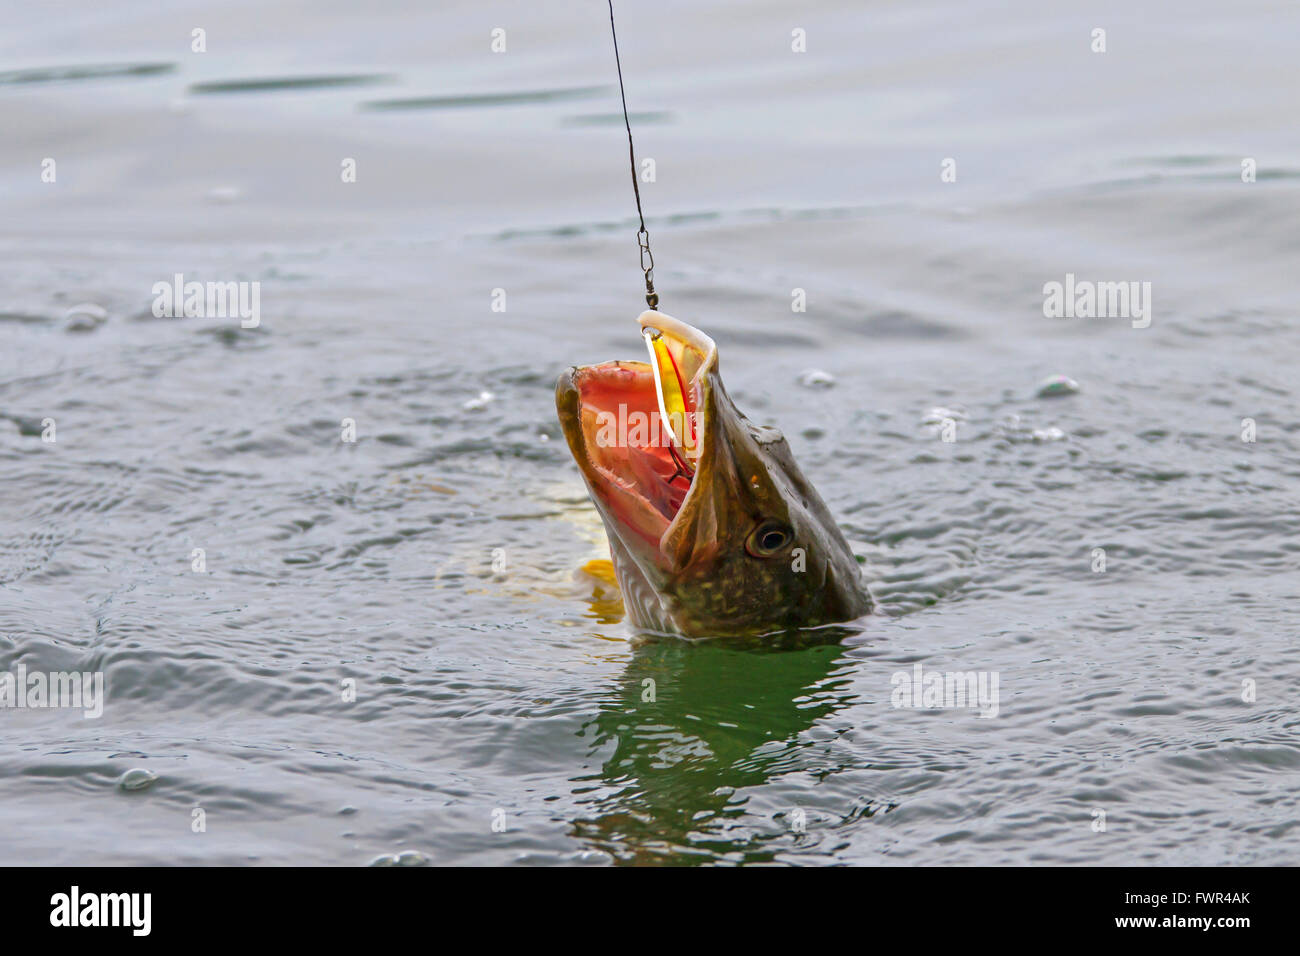 Hooked Northern pike (Esox lucius) in lake caught with lure on a fishing line Stock Photo